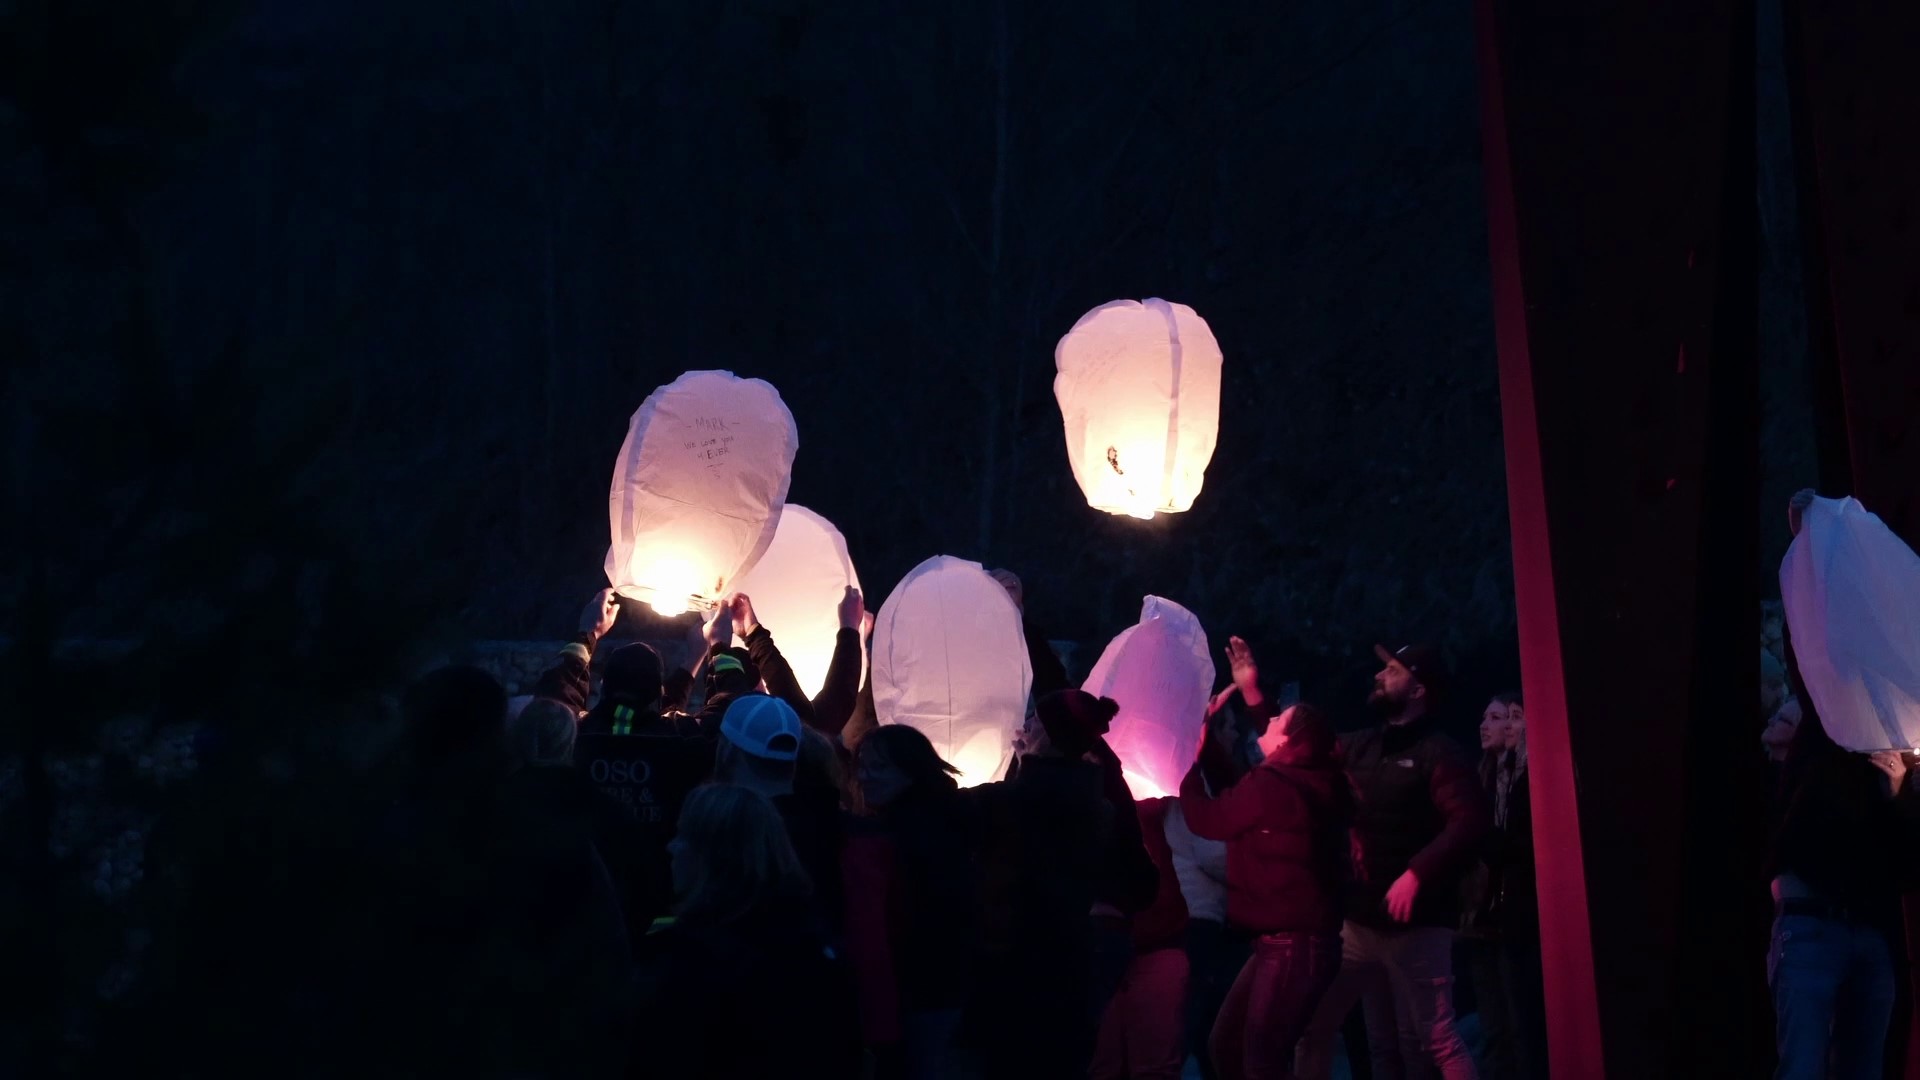 For the first time ever, family members invited KING 5 to witness the annual lantern release held to honor the 43 victims of the Oso landslide.